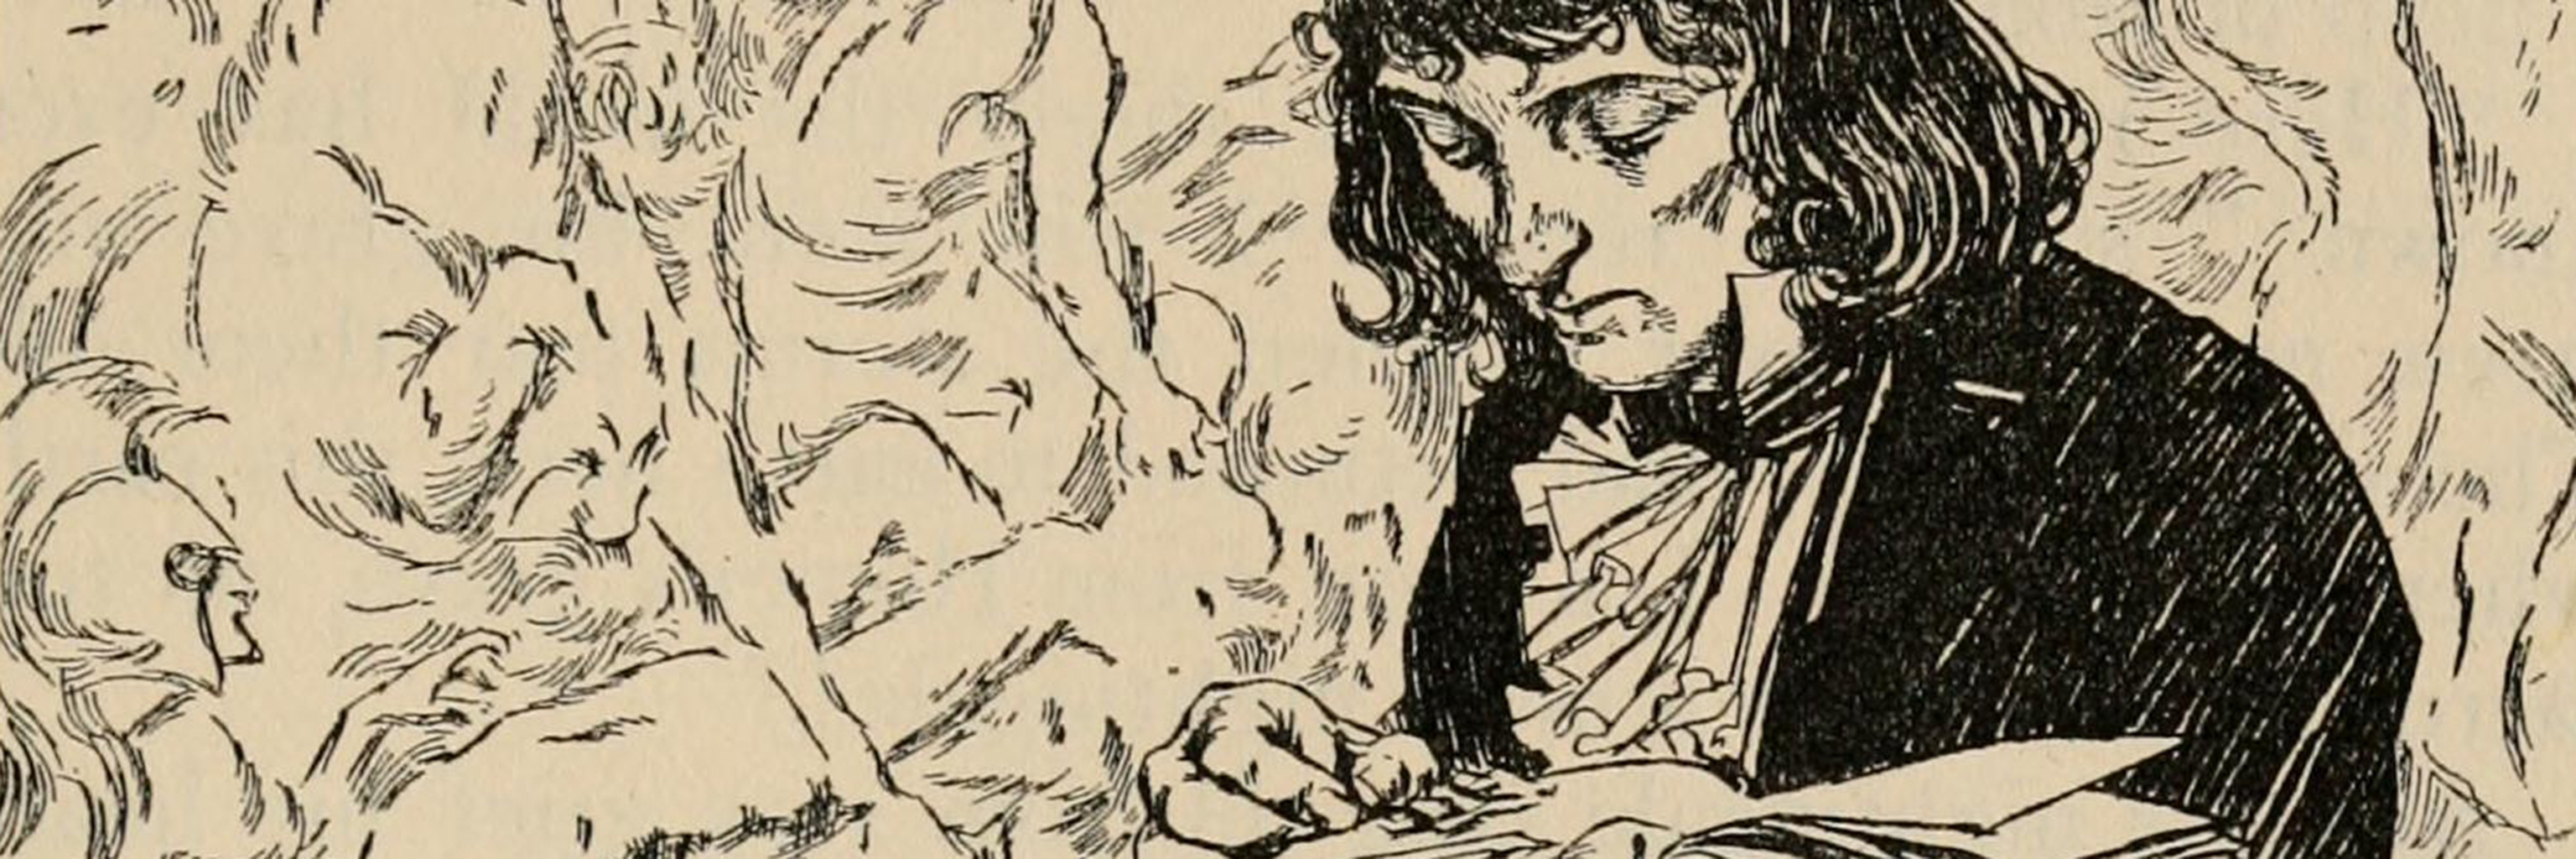 Closeup of an illustration from Hans Christian Anderson book, Fairy tales from Hans Christian Anderson.